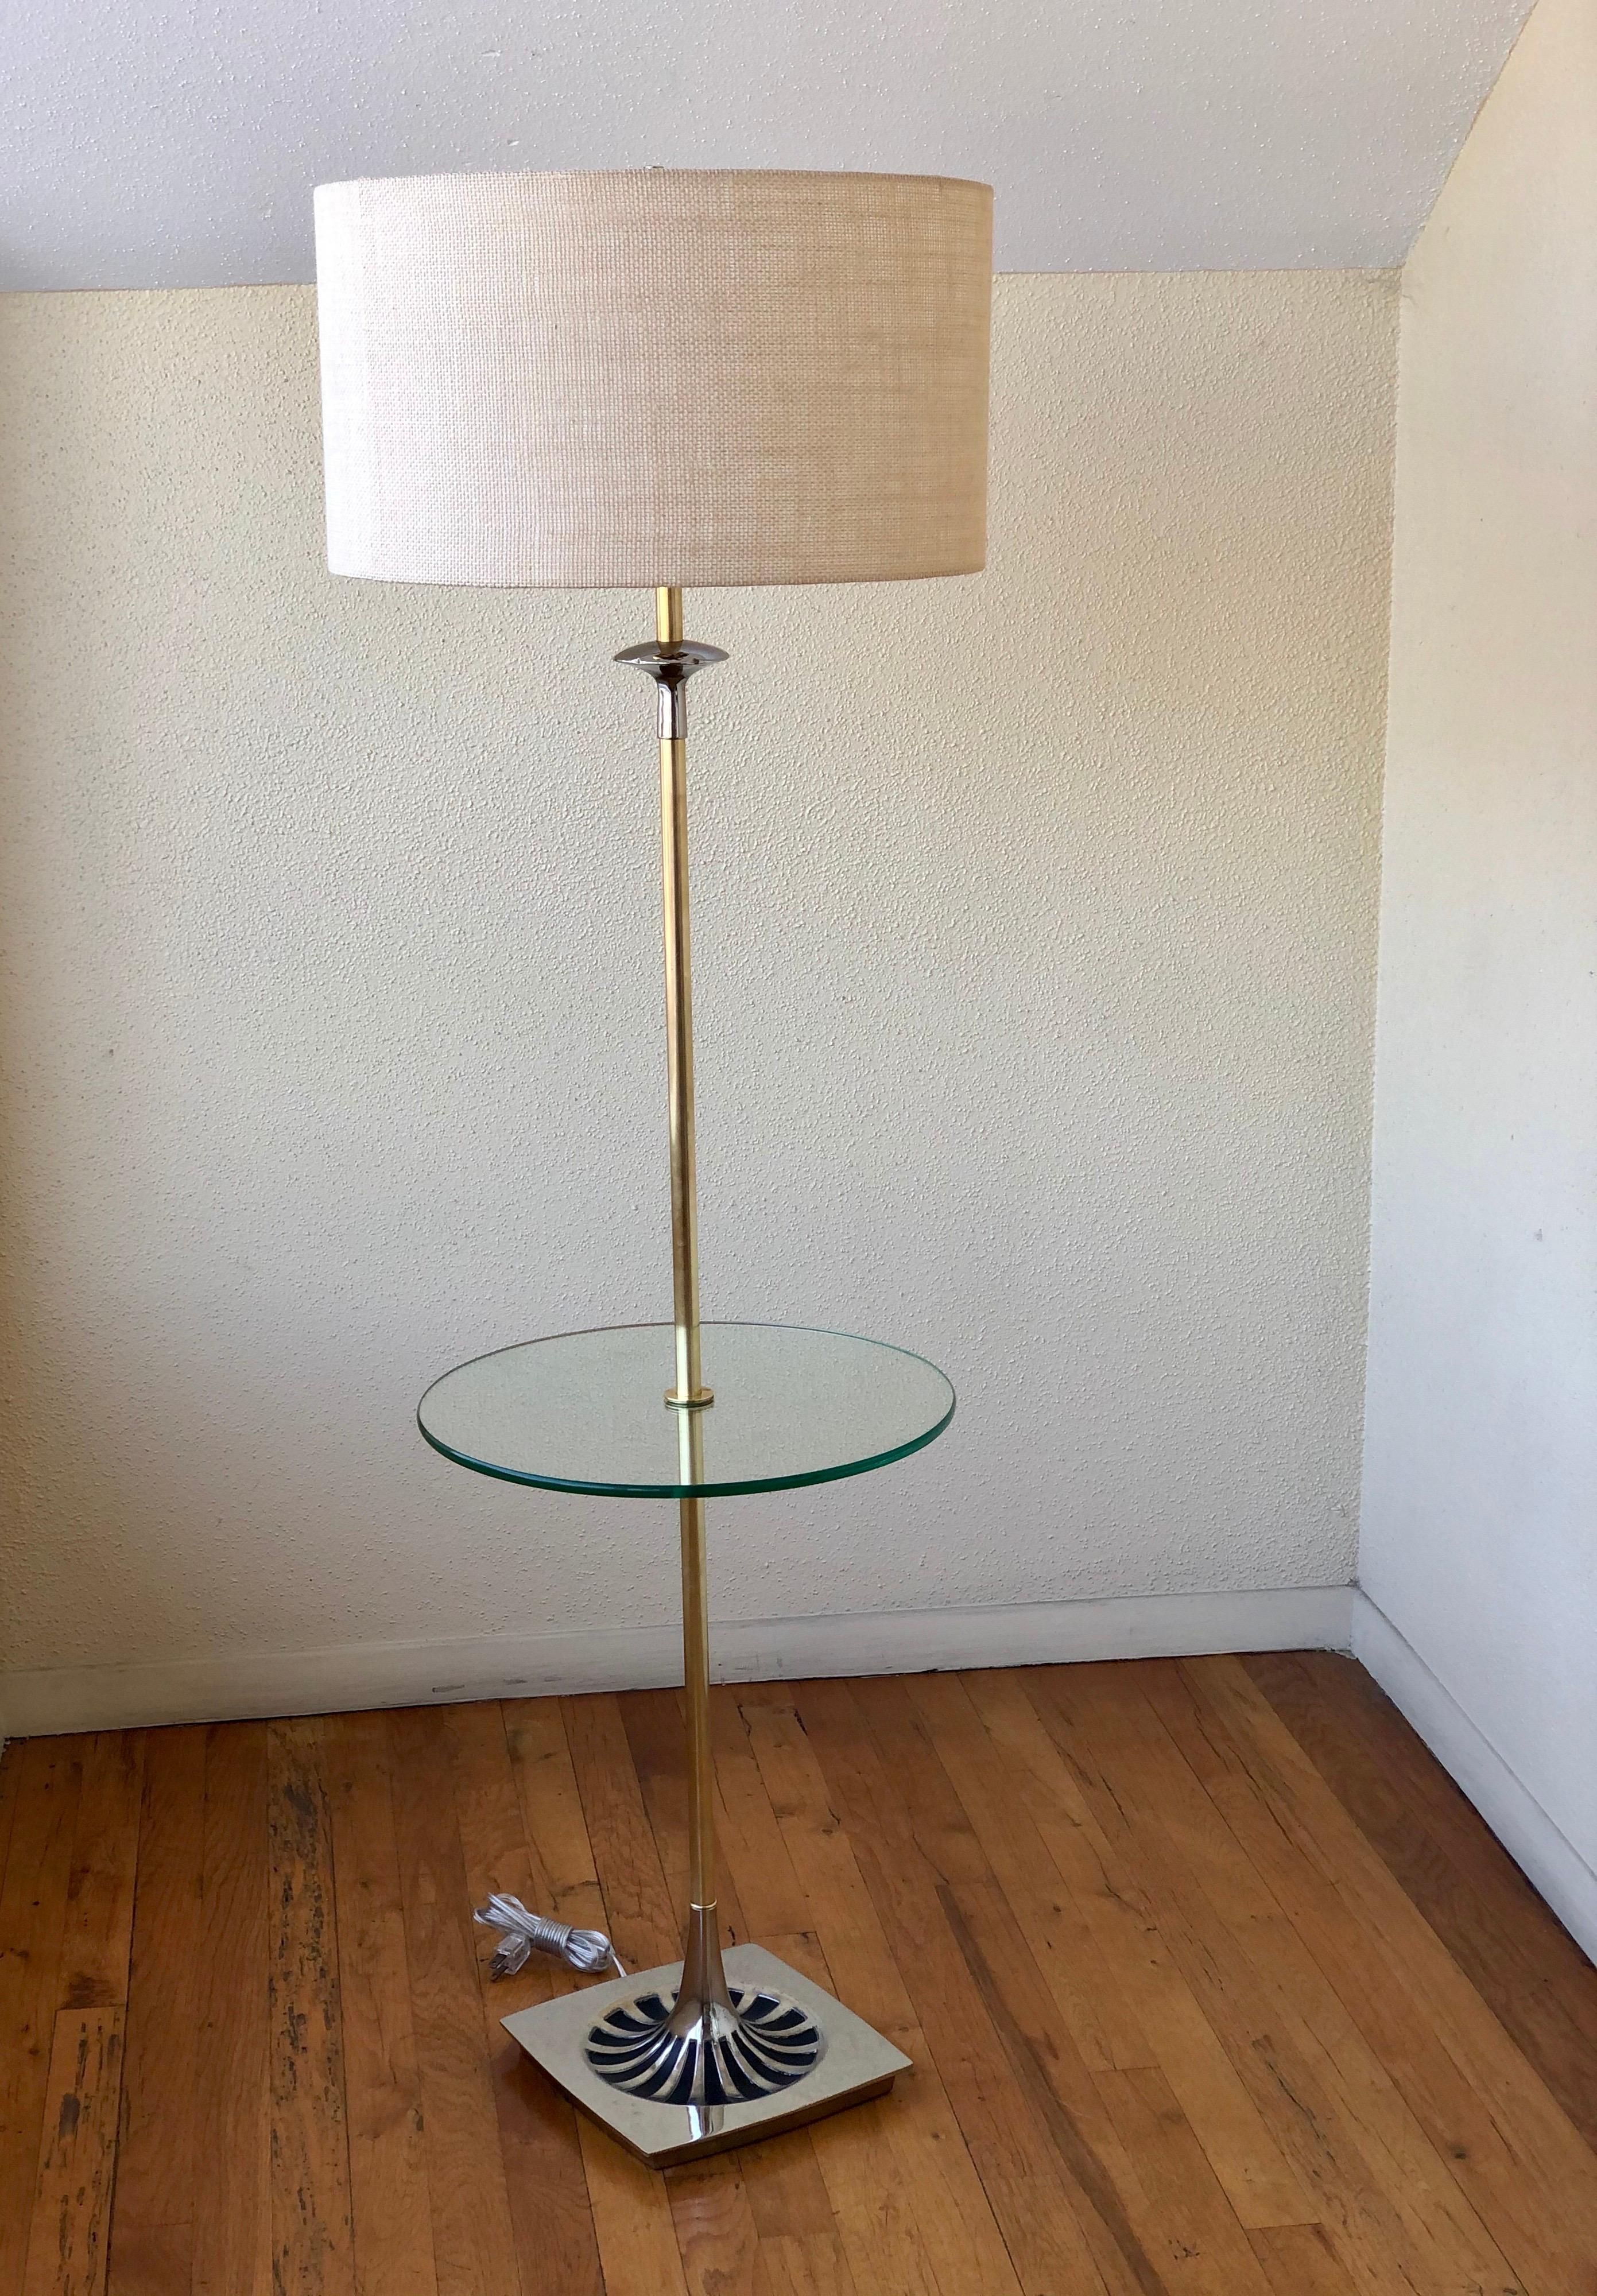 A beautiful floor or glass table lamp by the Laurel Lighting Company circa 1970s, we have polished and rewired the lamp the brass and chrome shows light wear due to age the lampshade it's not included, the lamp its 58